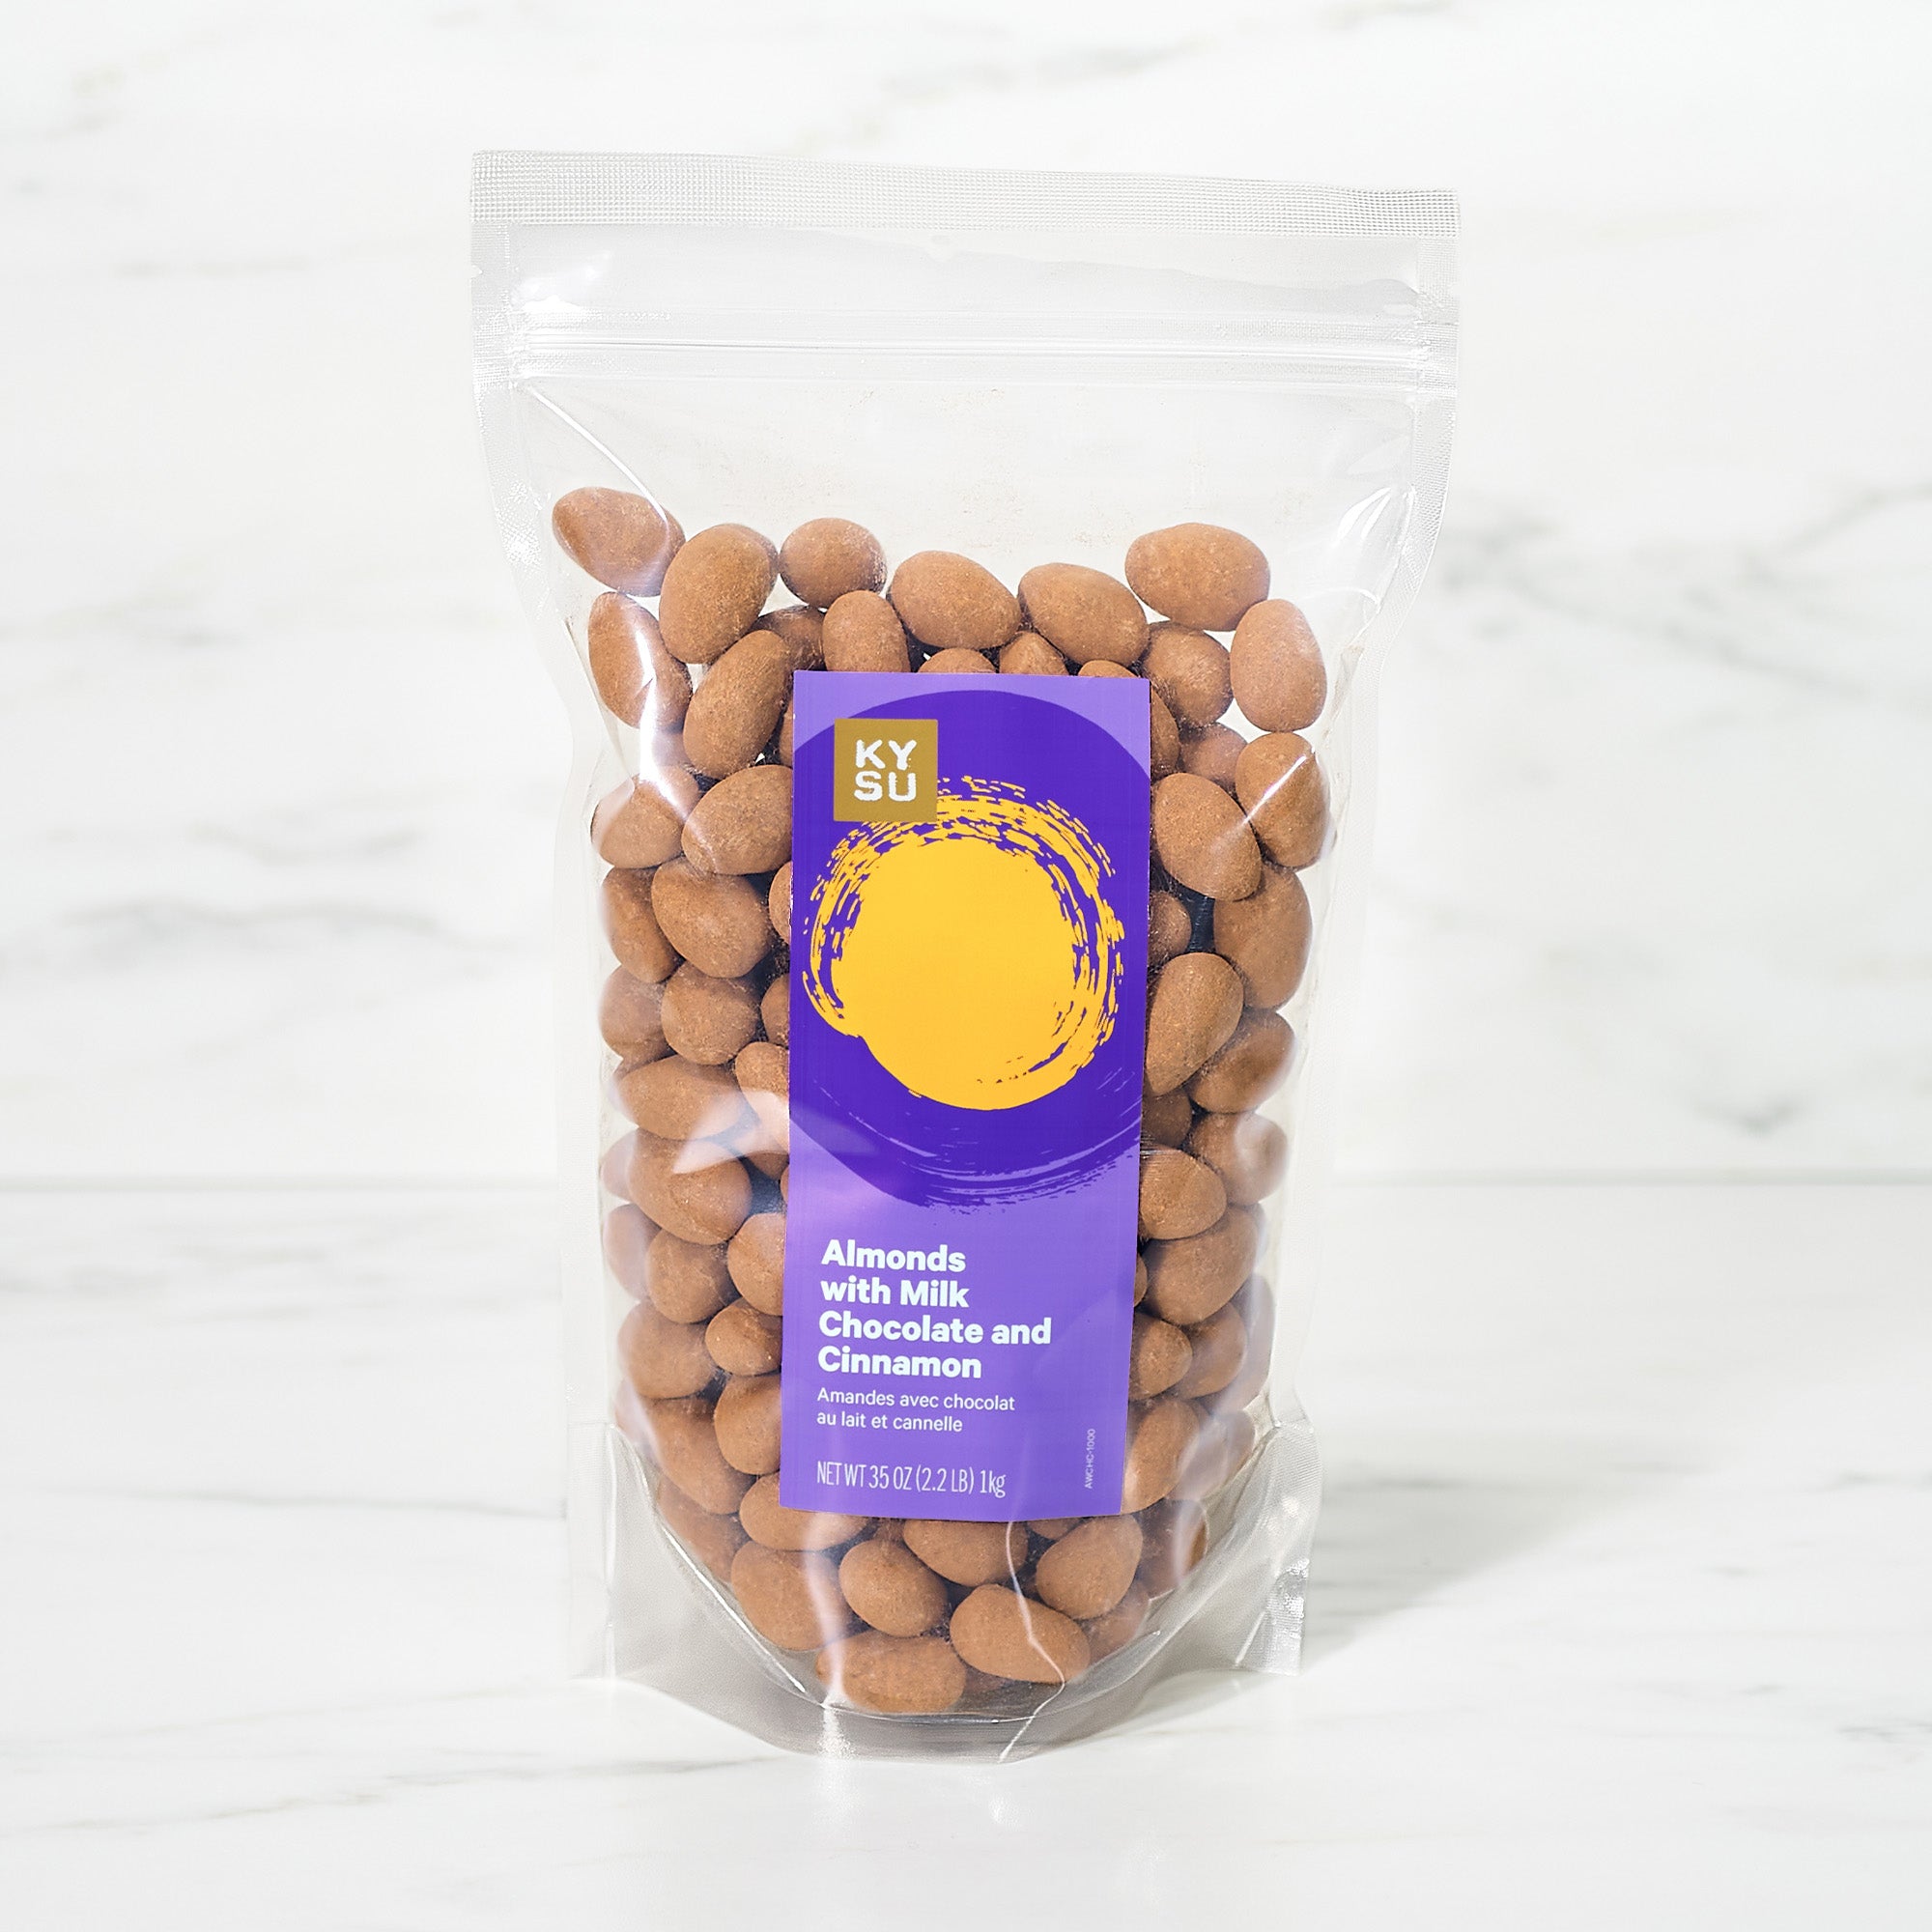 Almonds with chocolate and cinnamon, 1kg